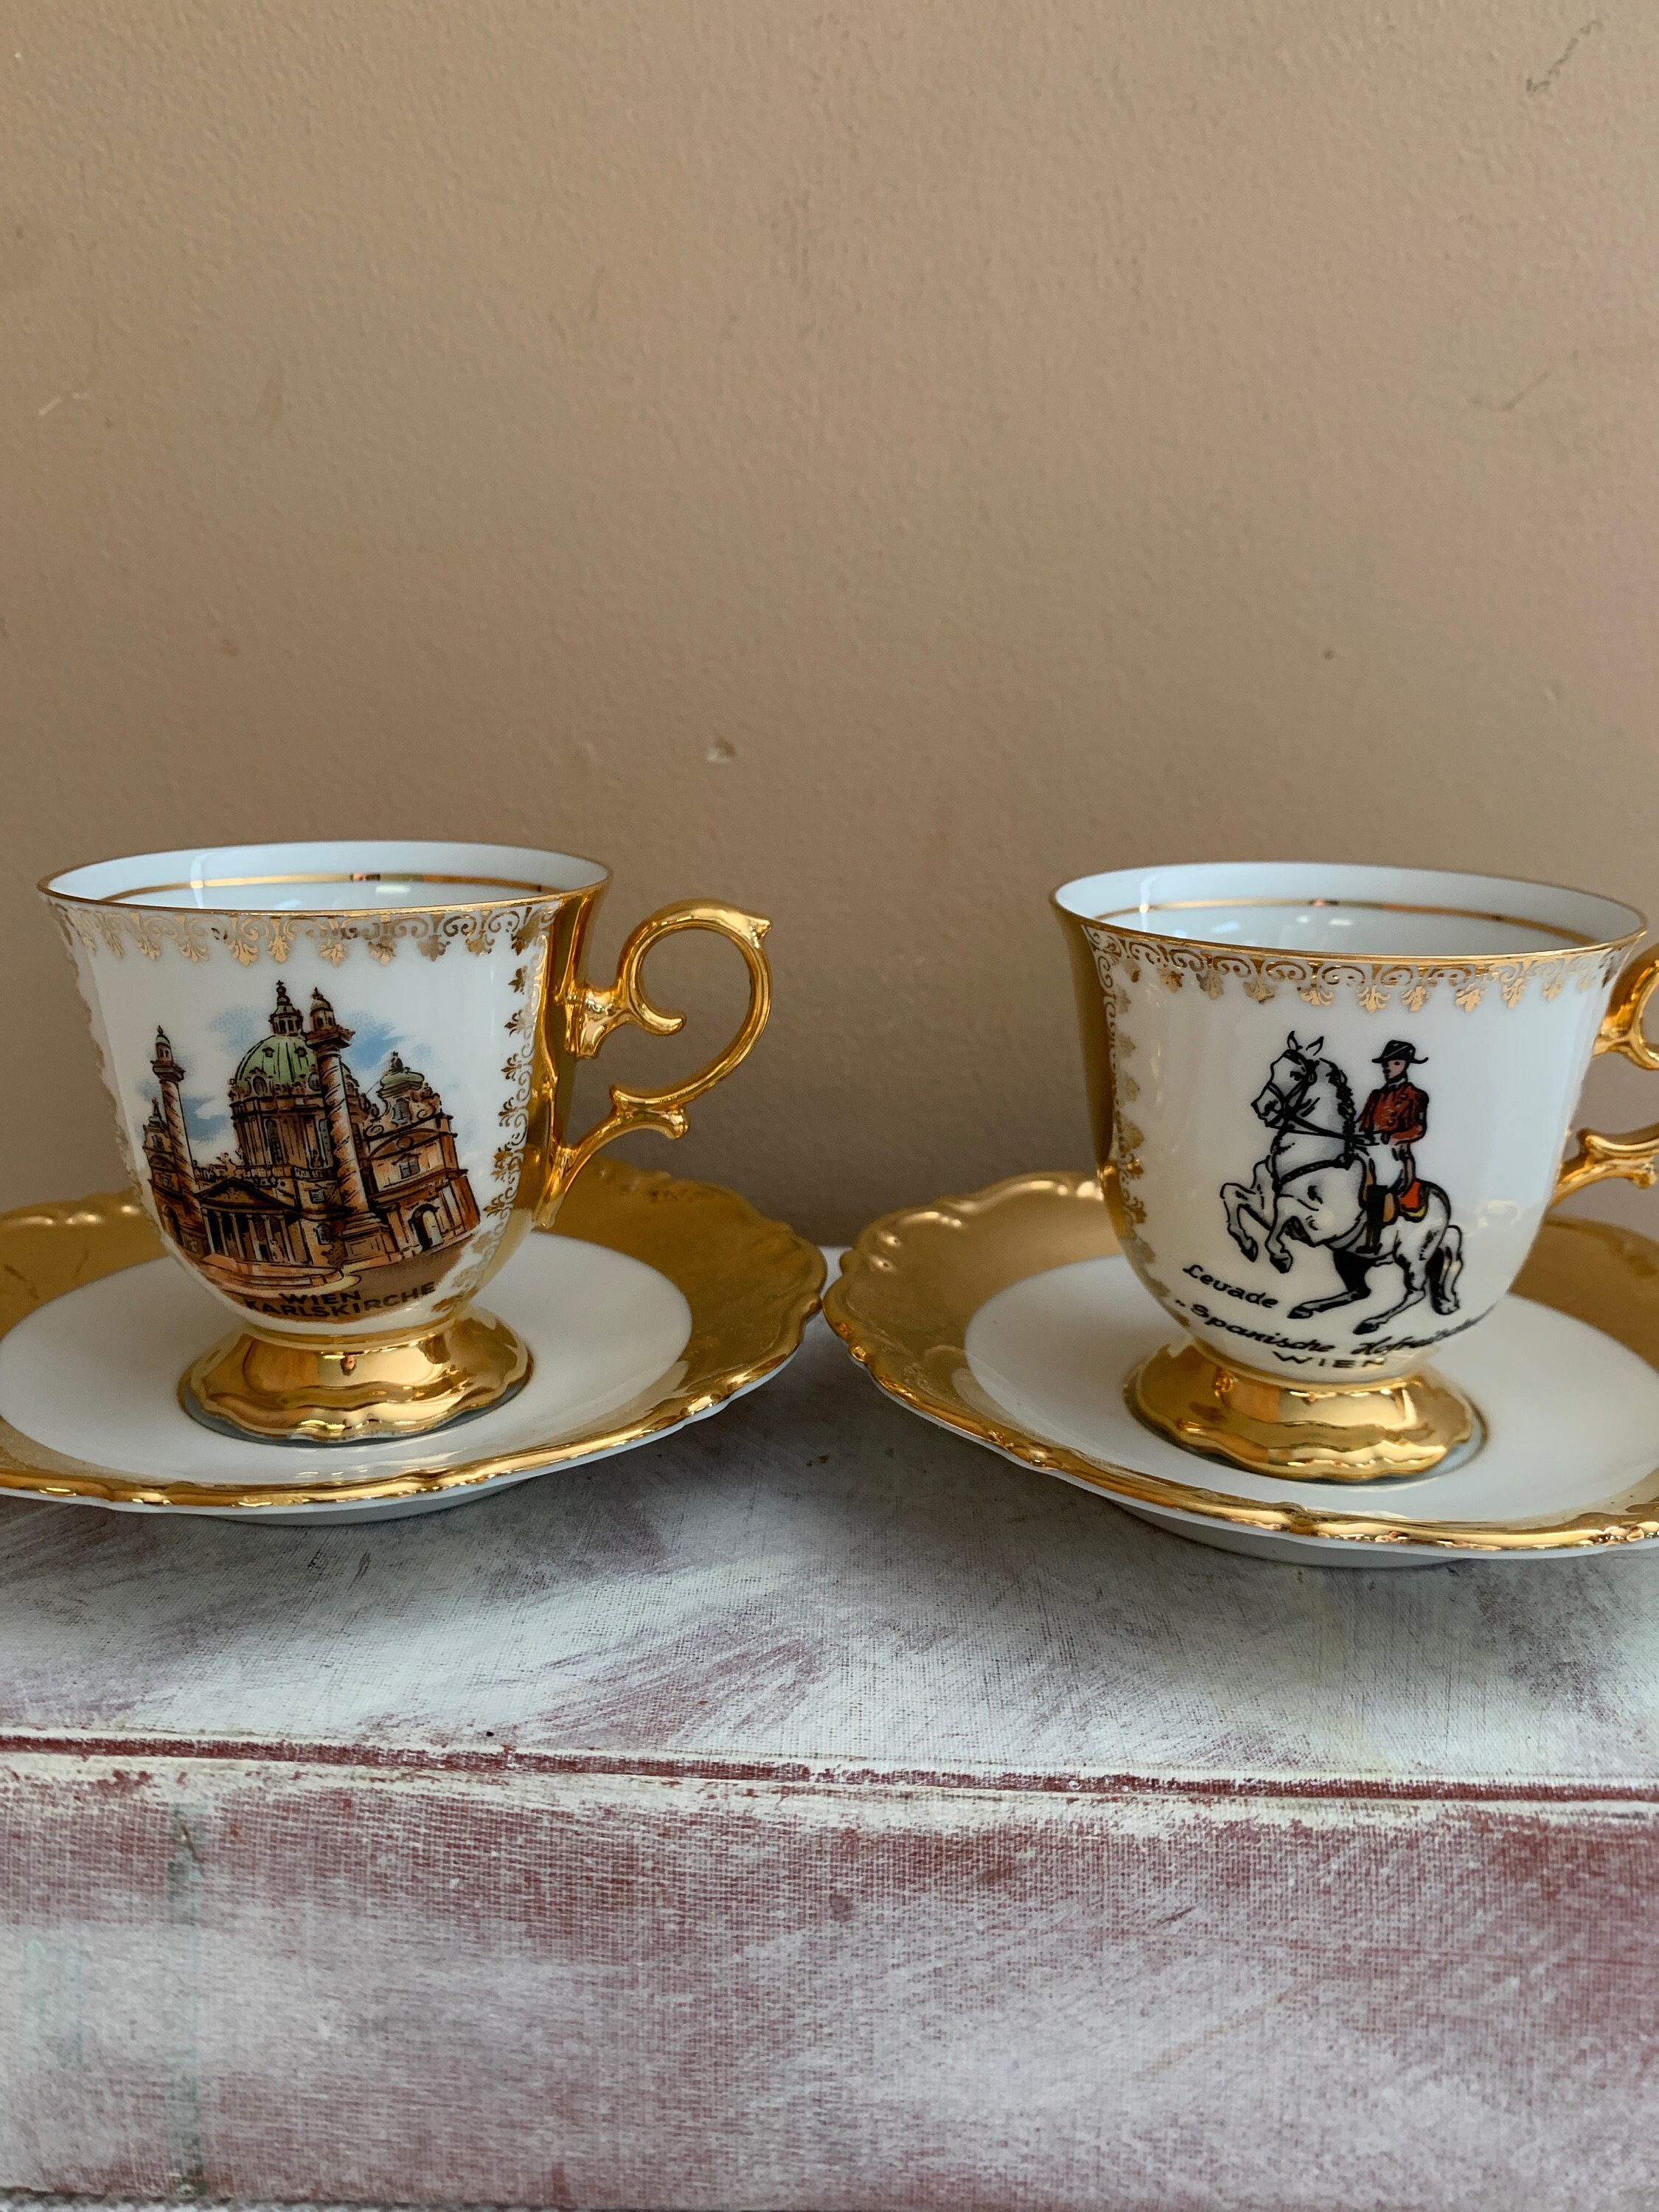 Pictures 6, Gold and Demitasse Saucers, With Wien With Ceramic Coffee Bavarian Tea Etsy Cups or Vintage for Six Porcelain Set - Vienna